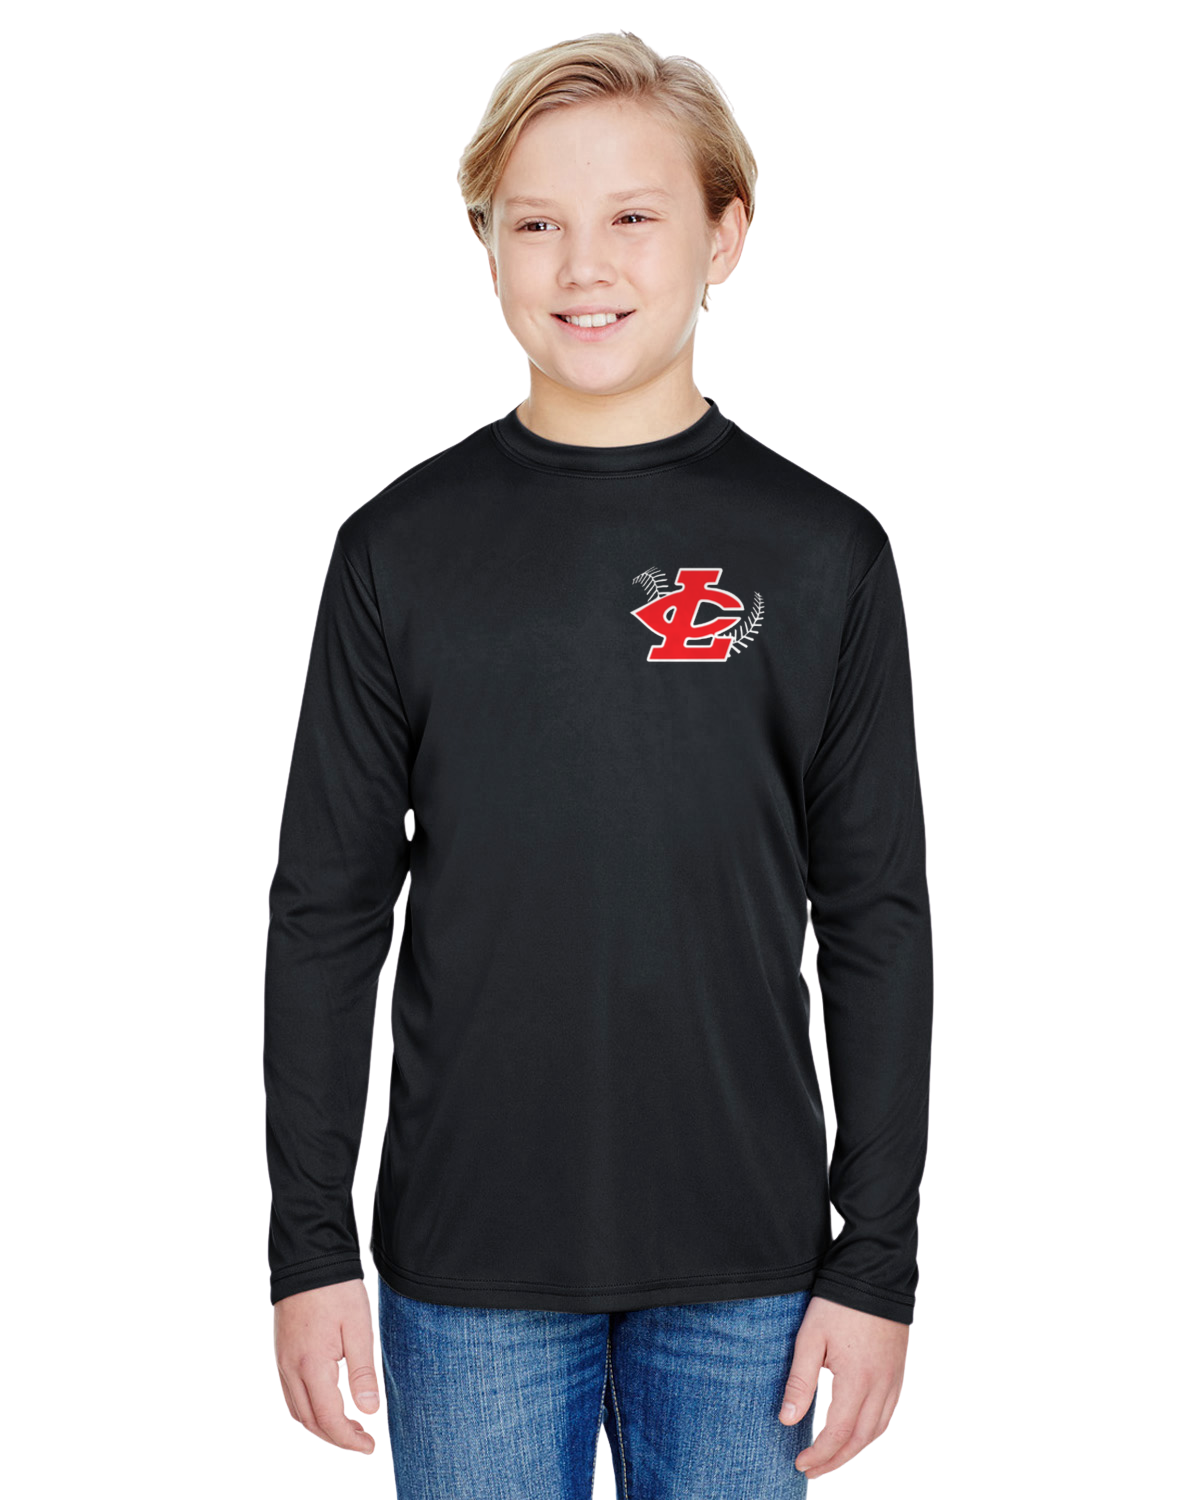 CLLL A4 Youth Cooling Performance Long Sleeve T-Shirt BLACK